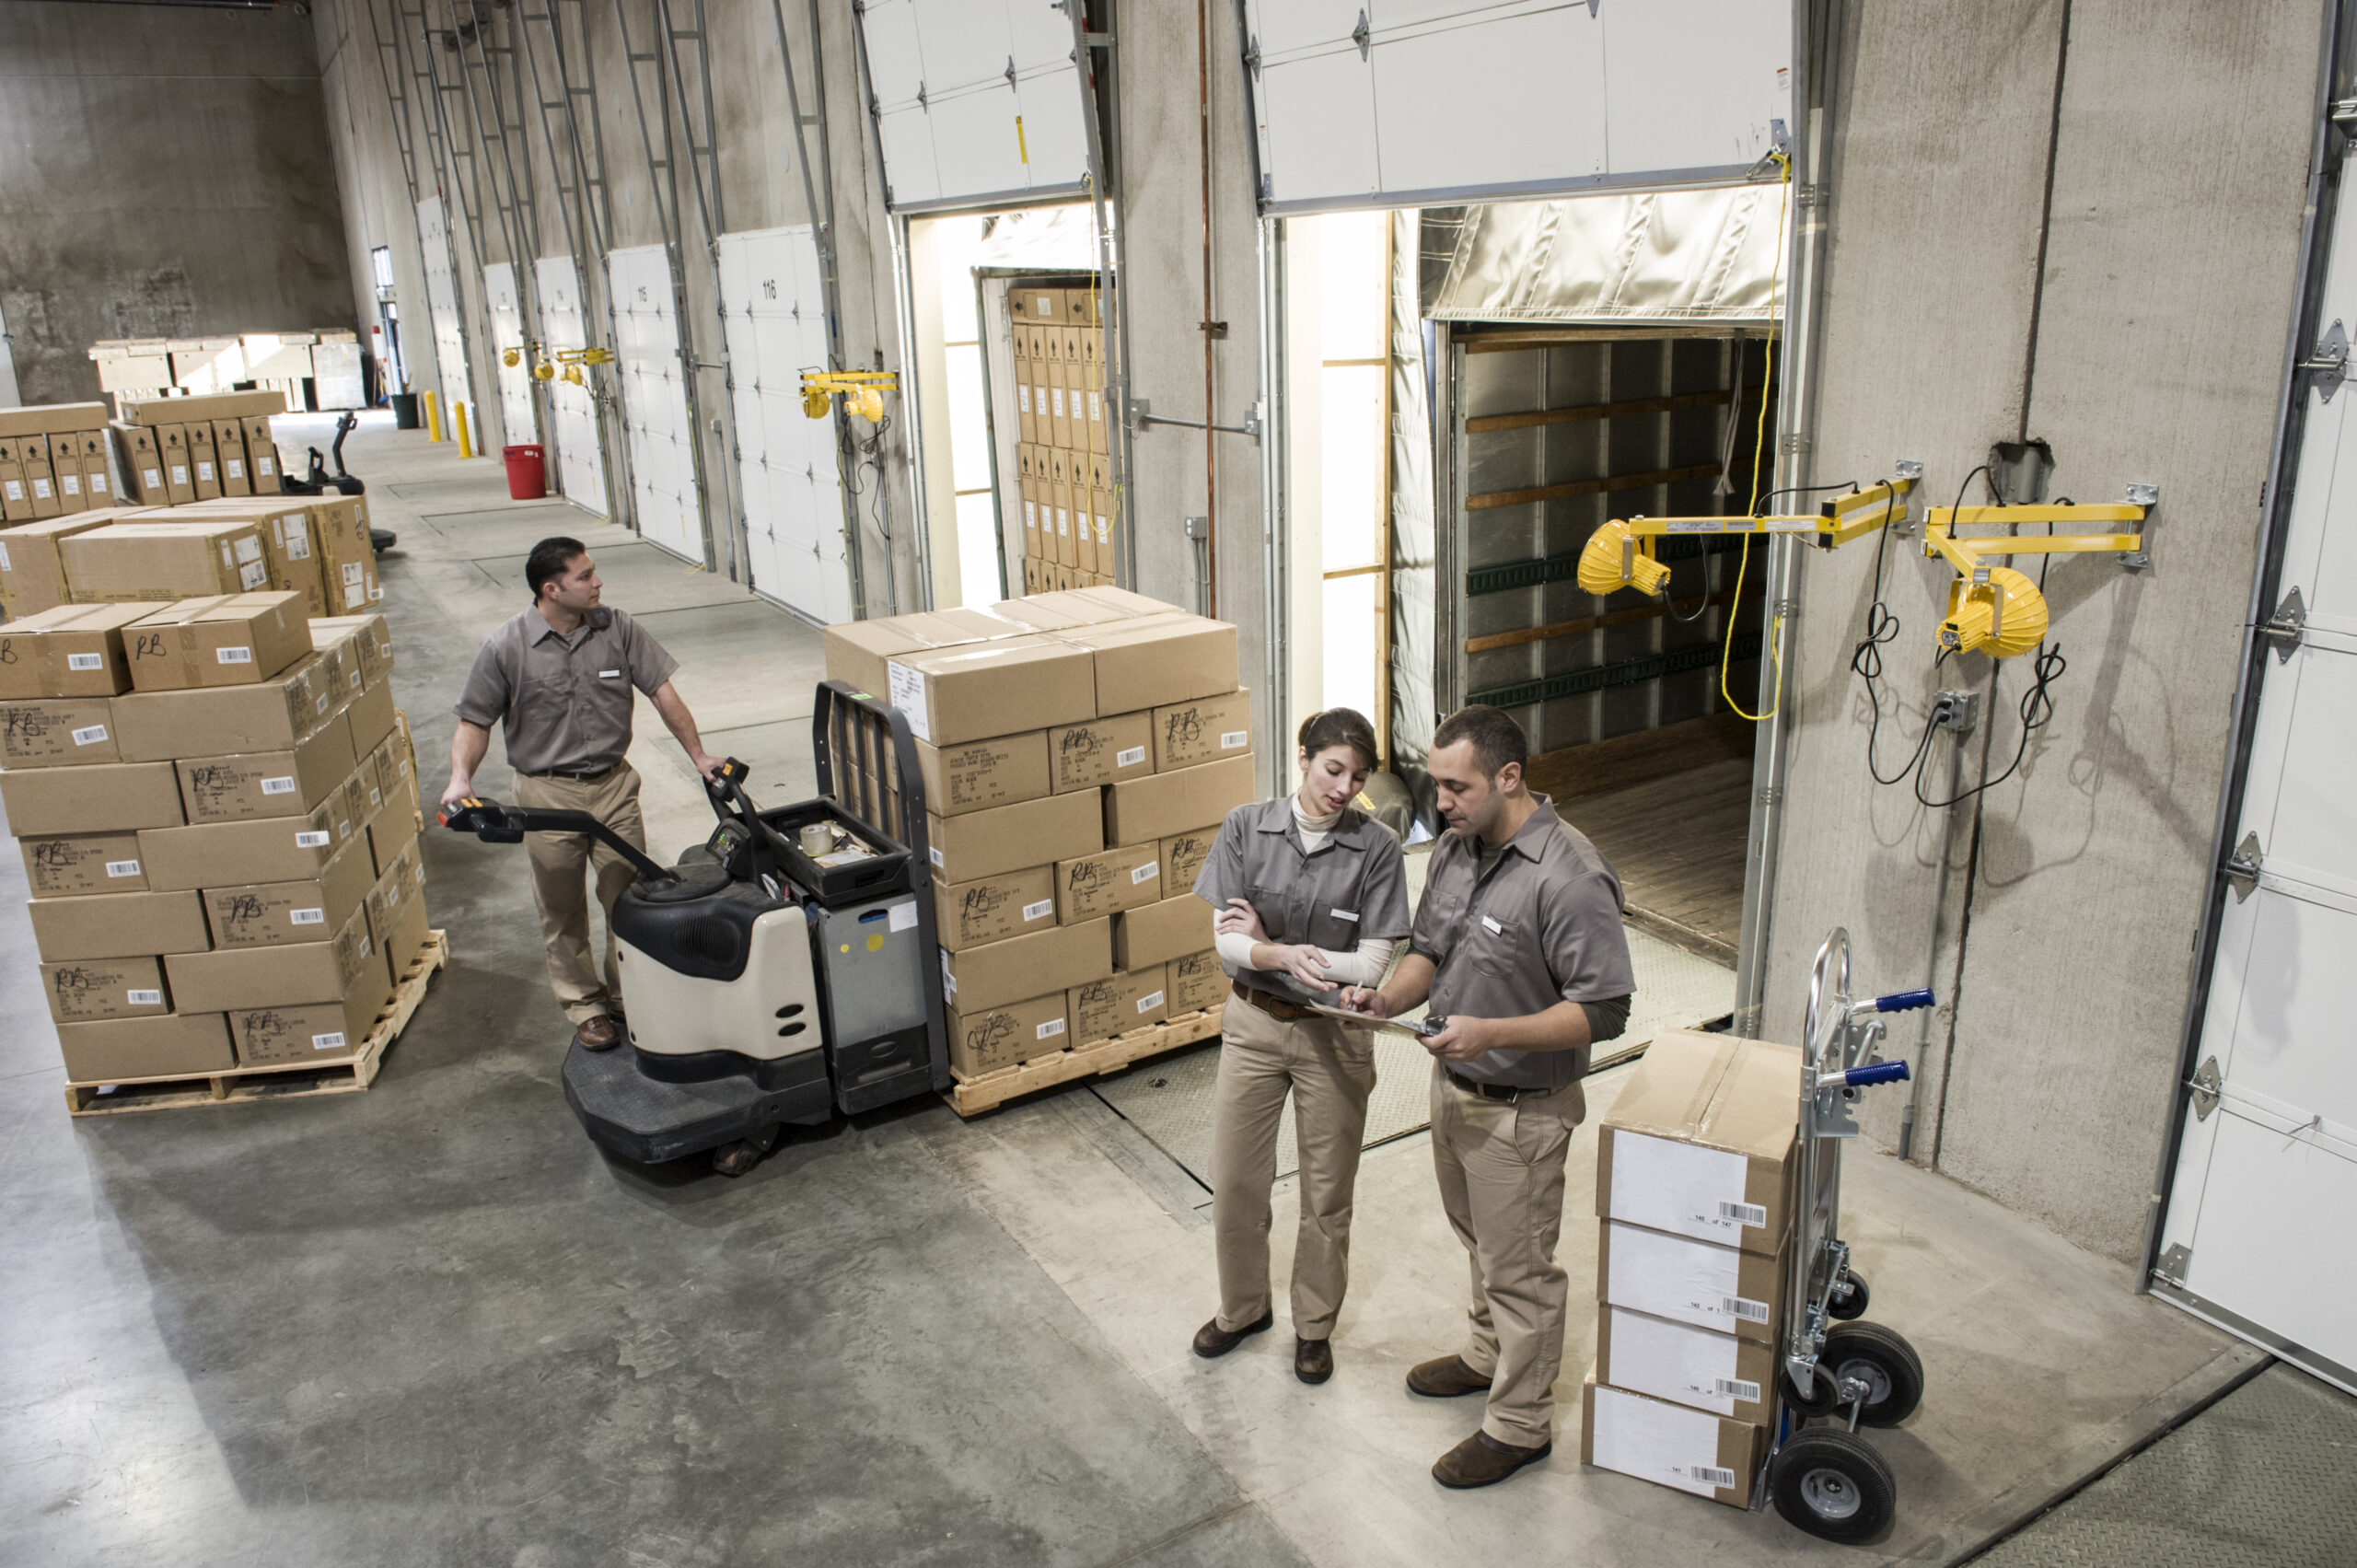 Cross docking: The Definition, Advantages and Disadvantages